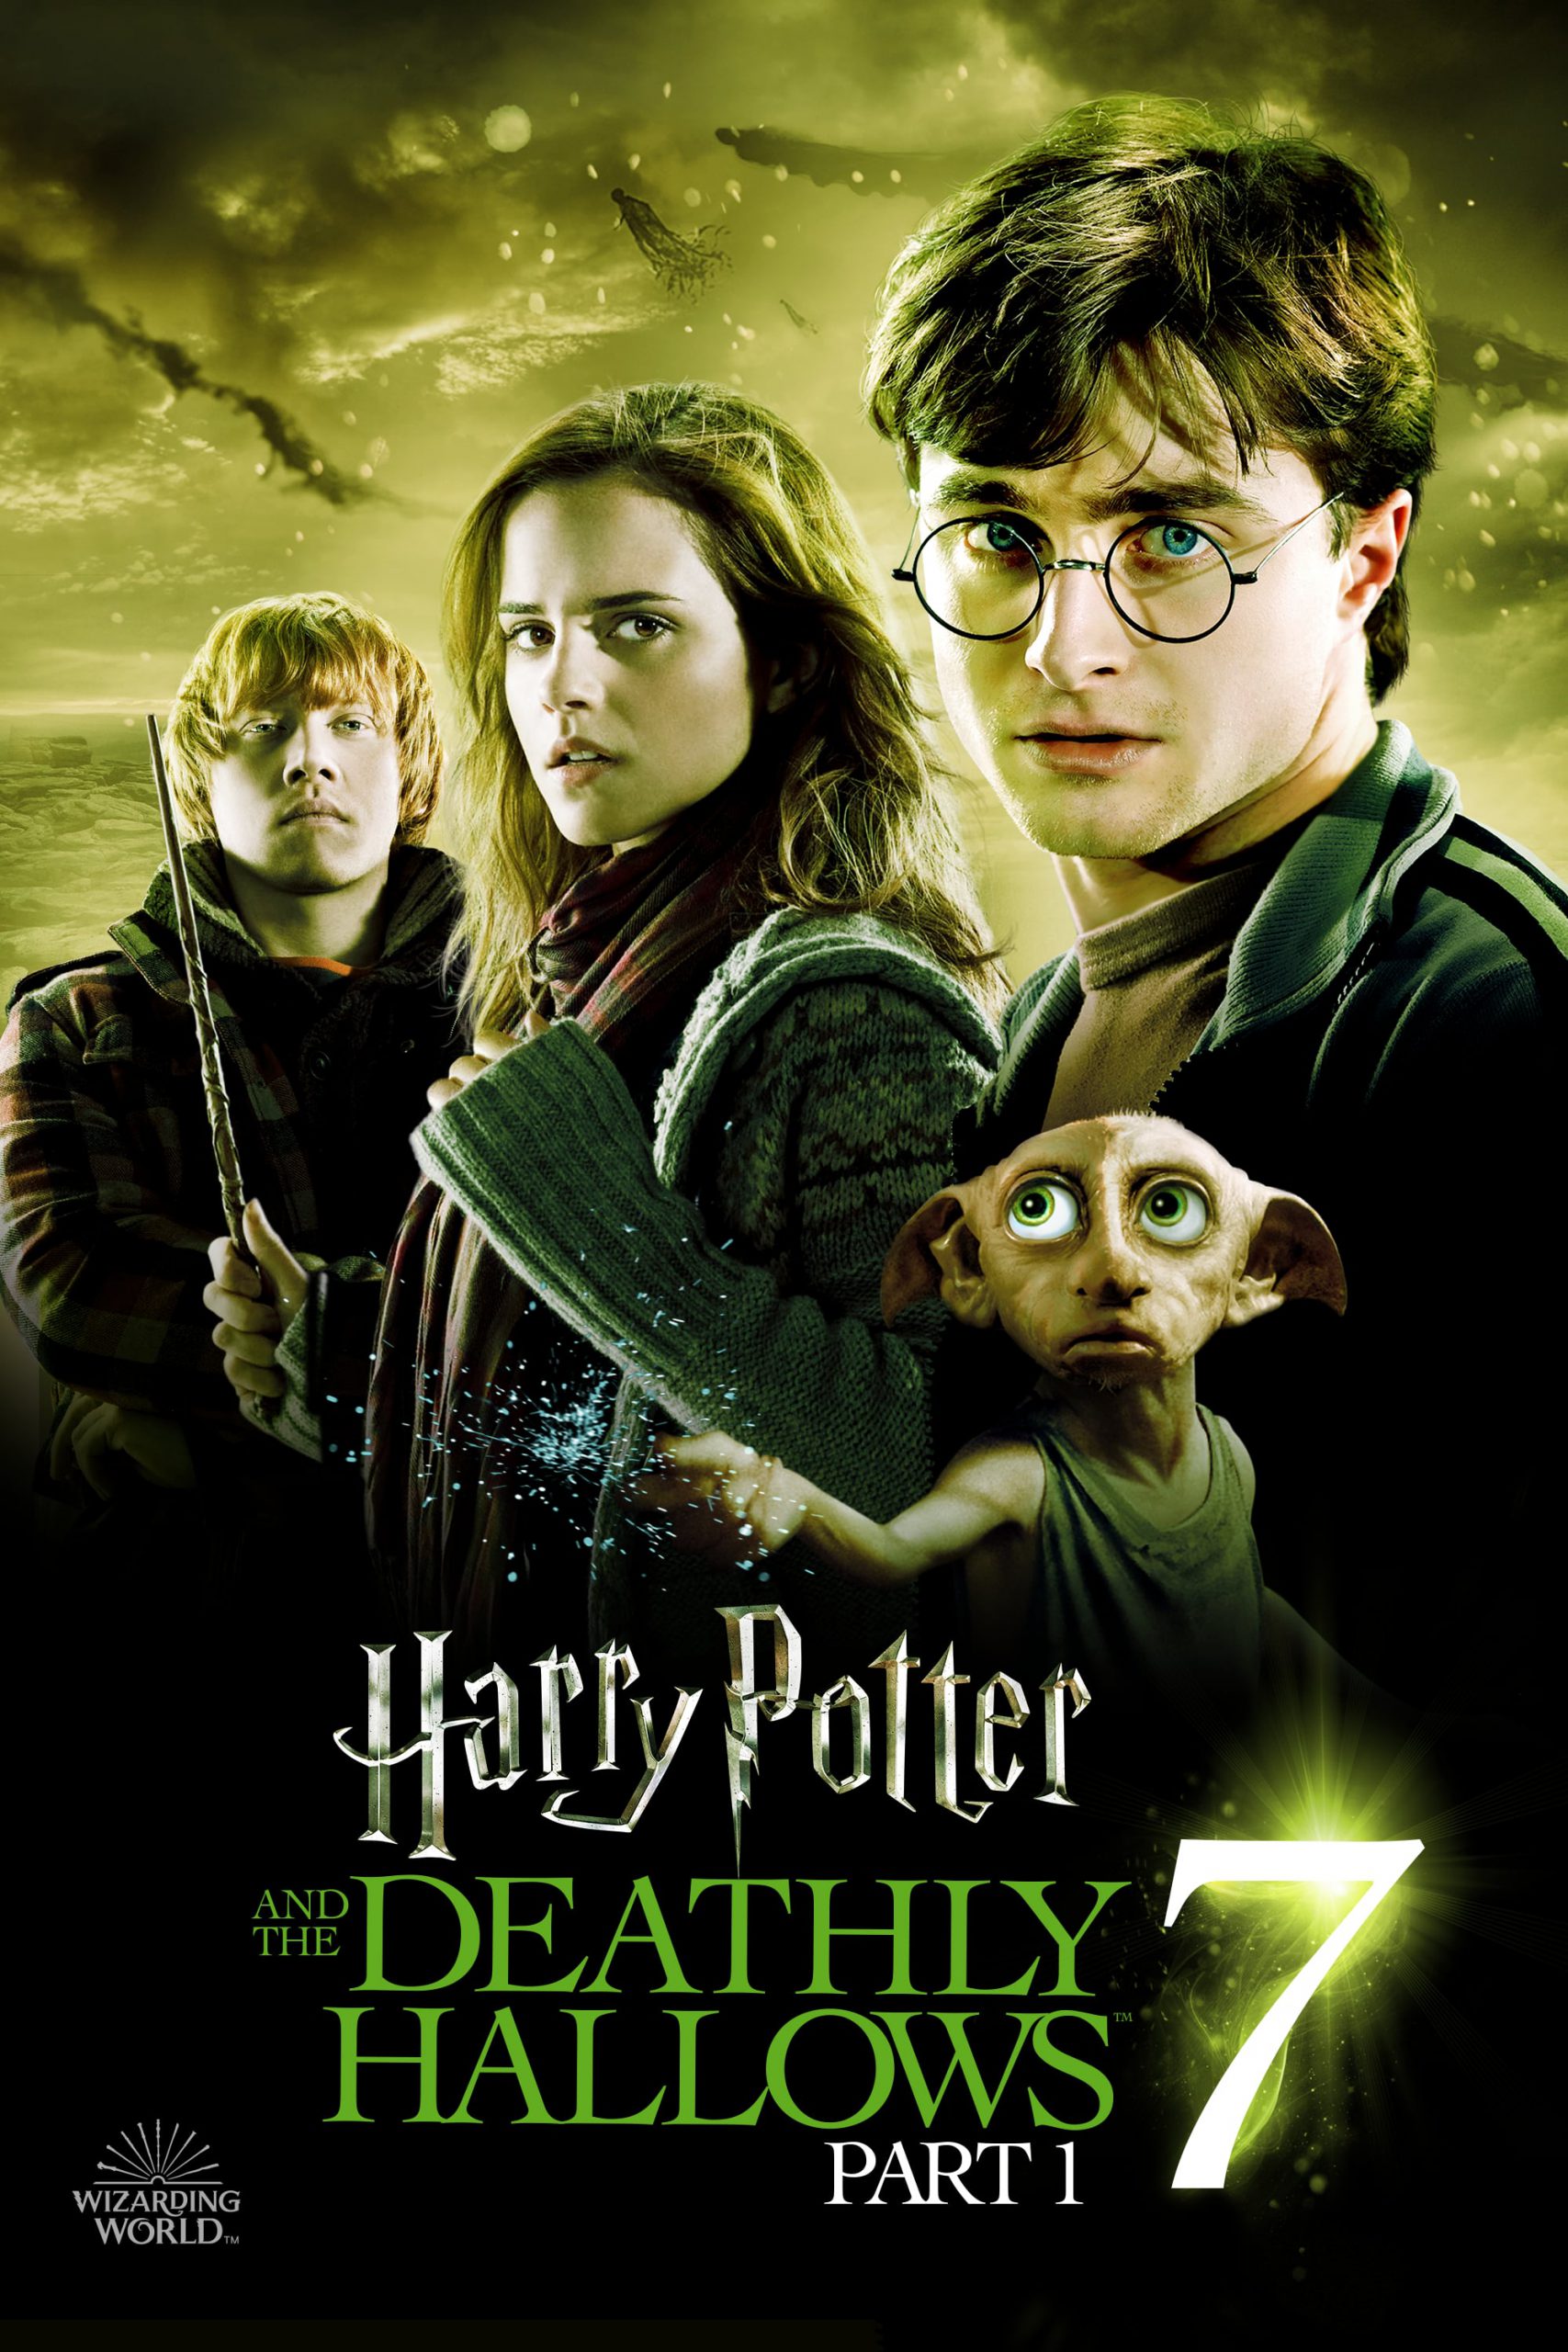 deathly hallows part 2 480p 200mb